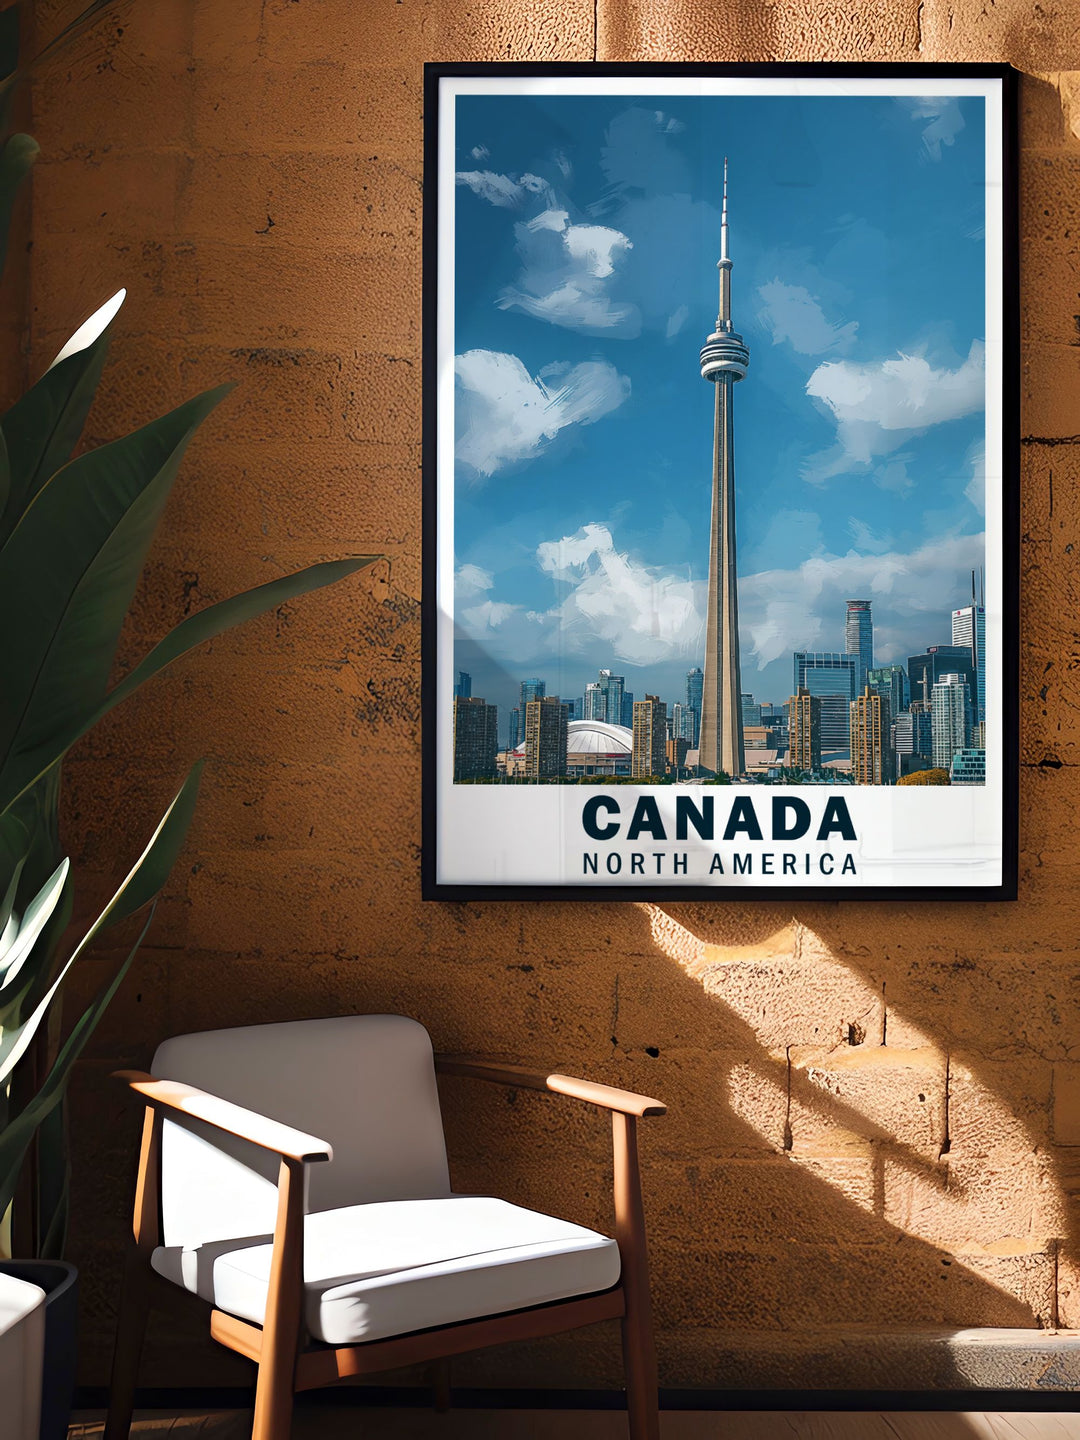 Highlighting the majestic presence of the CN Tower and the lively city below, this travel poster is perfect for those who appreciate the architectural and cultural richness of Toronto.